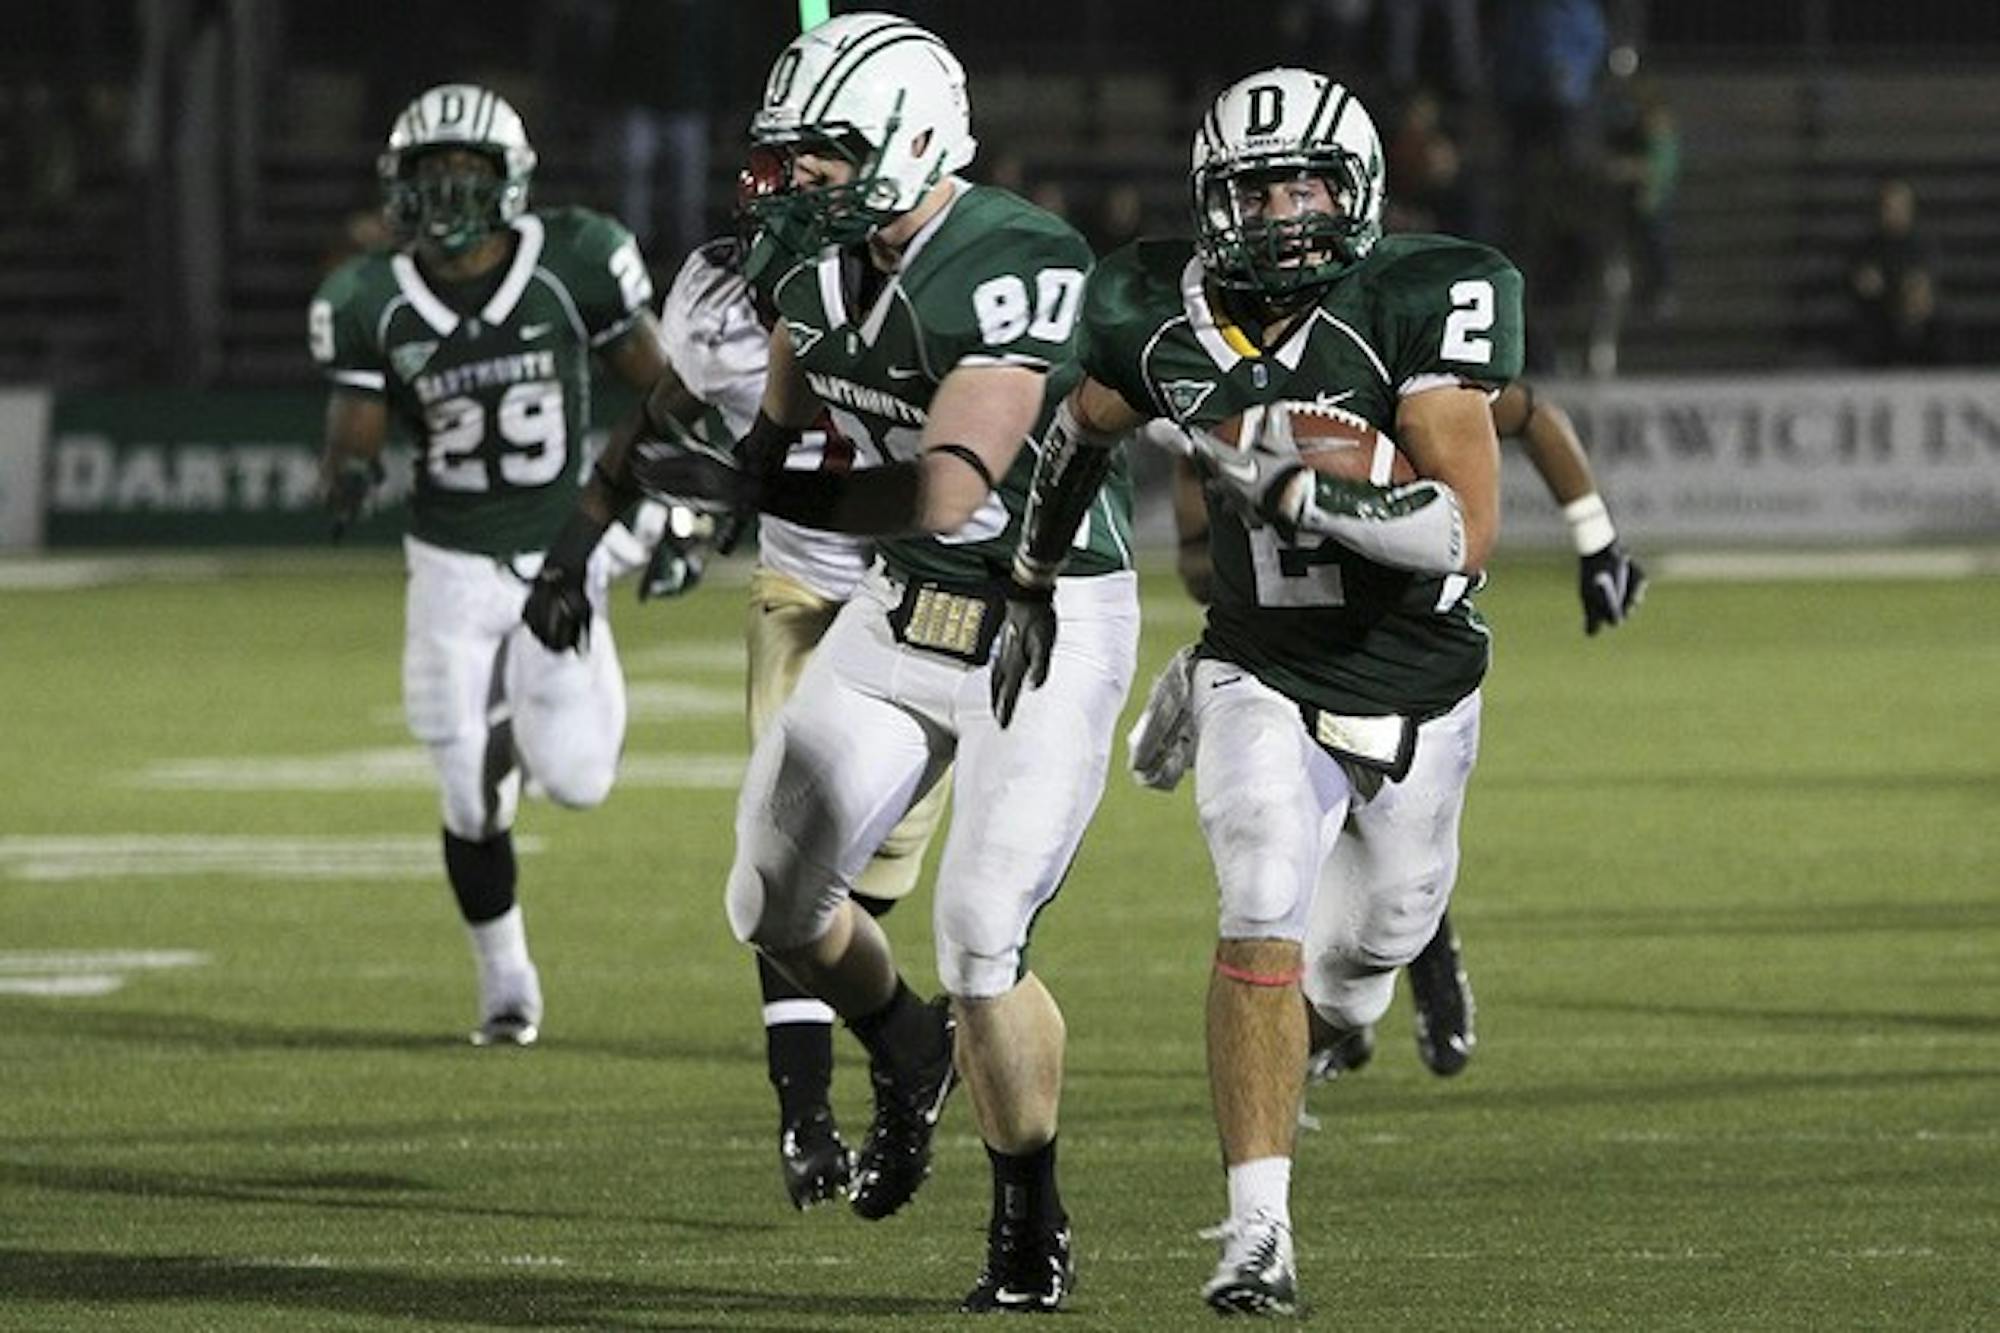 The Dartmouth football team can still win the Ivy League with victories in its remaining two games and outside help from around the league.